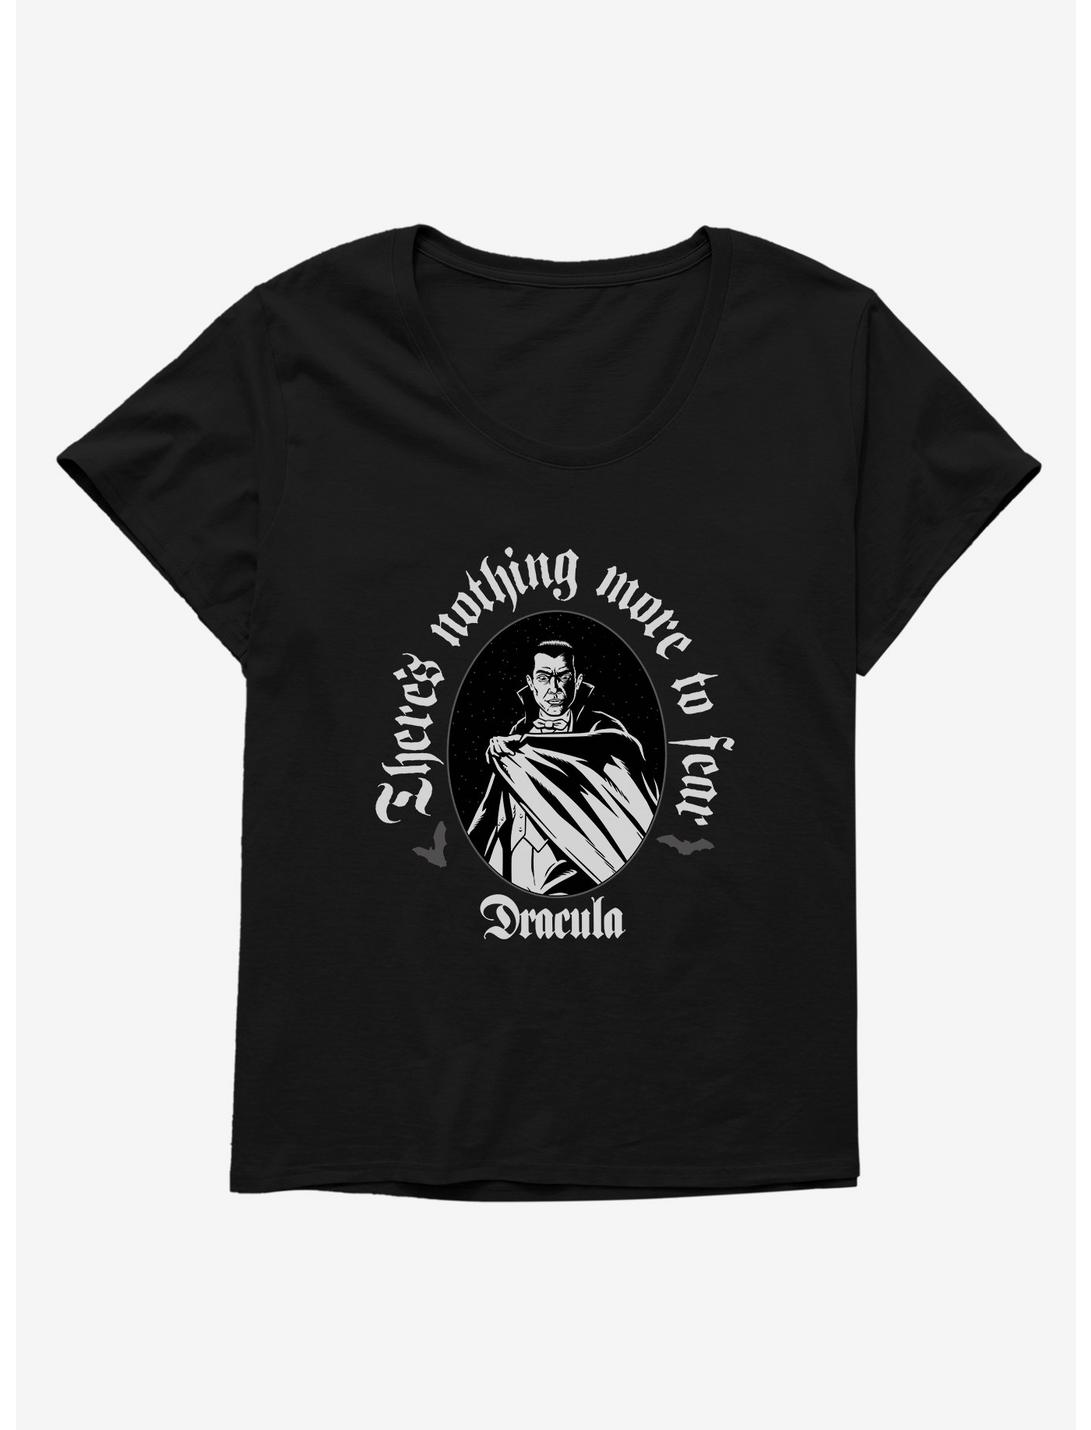 Universal Monsters Dracula There's Nothing More To Fear Girls T-Shirt Plus Size, BLACK, hi-res